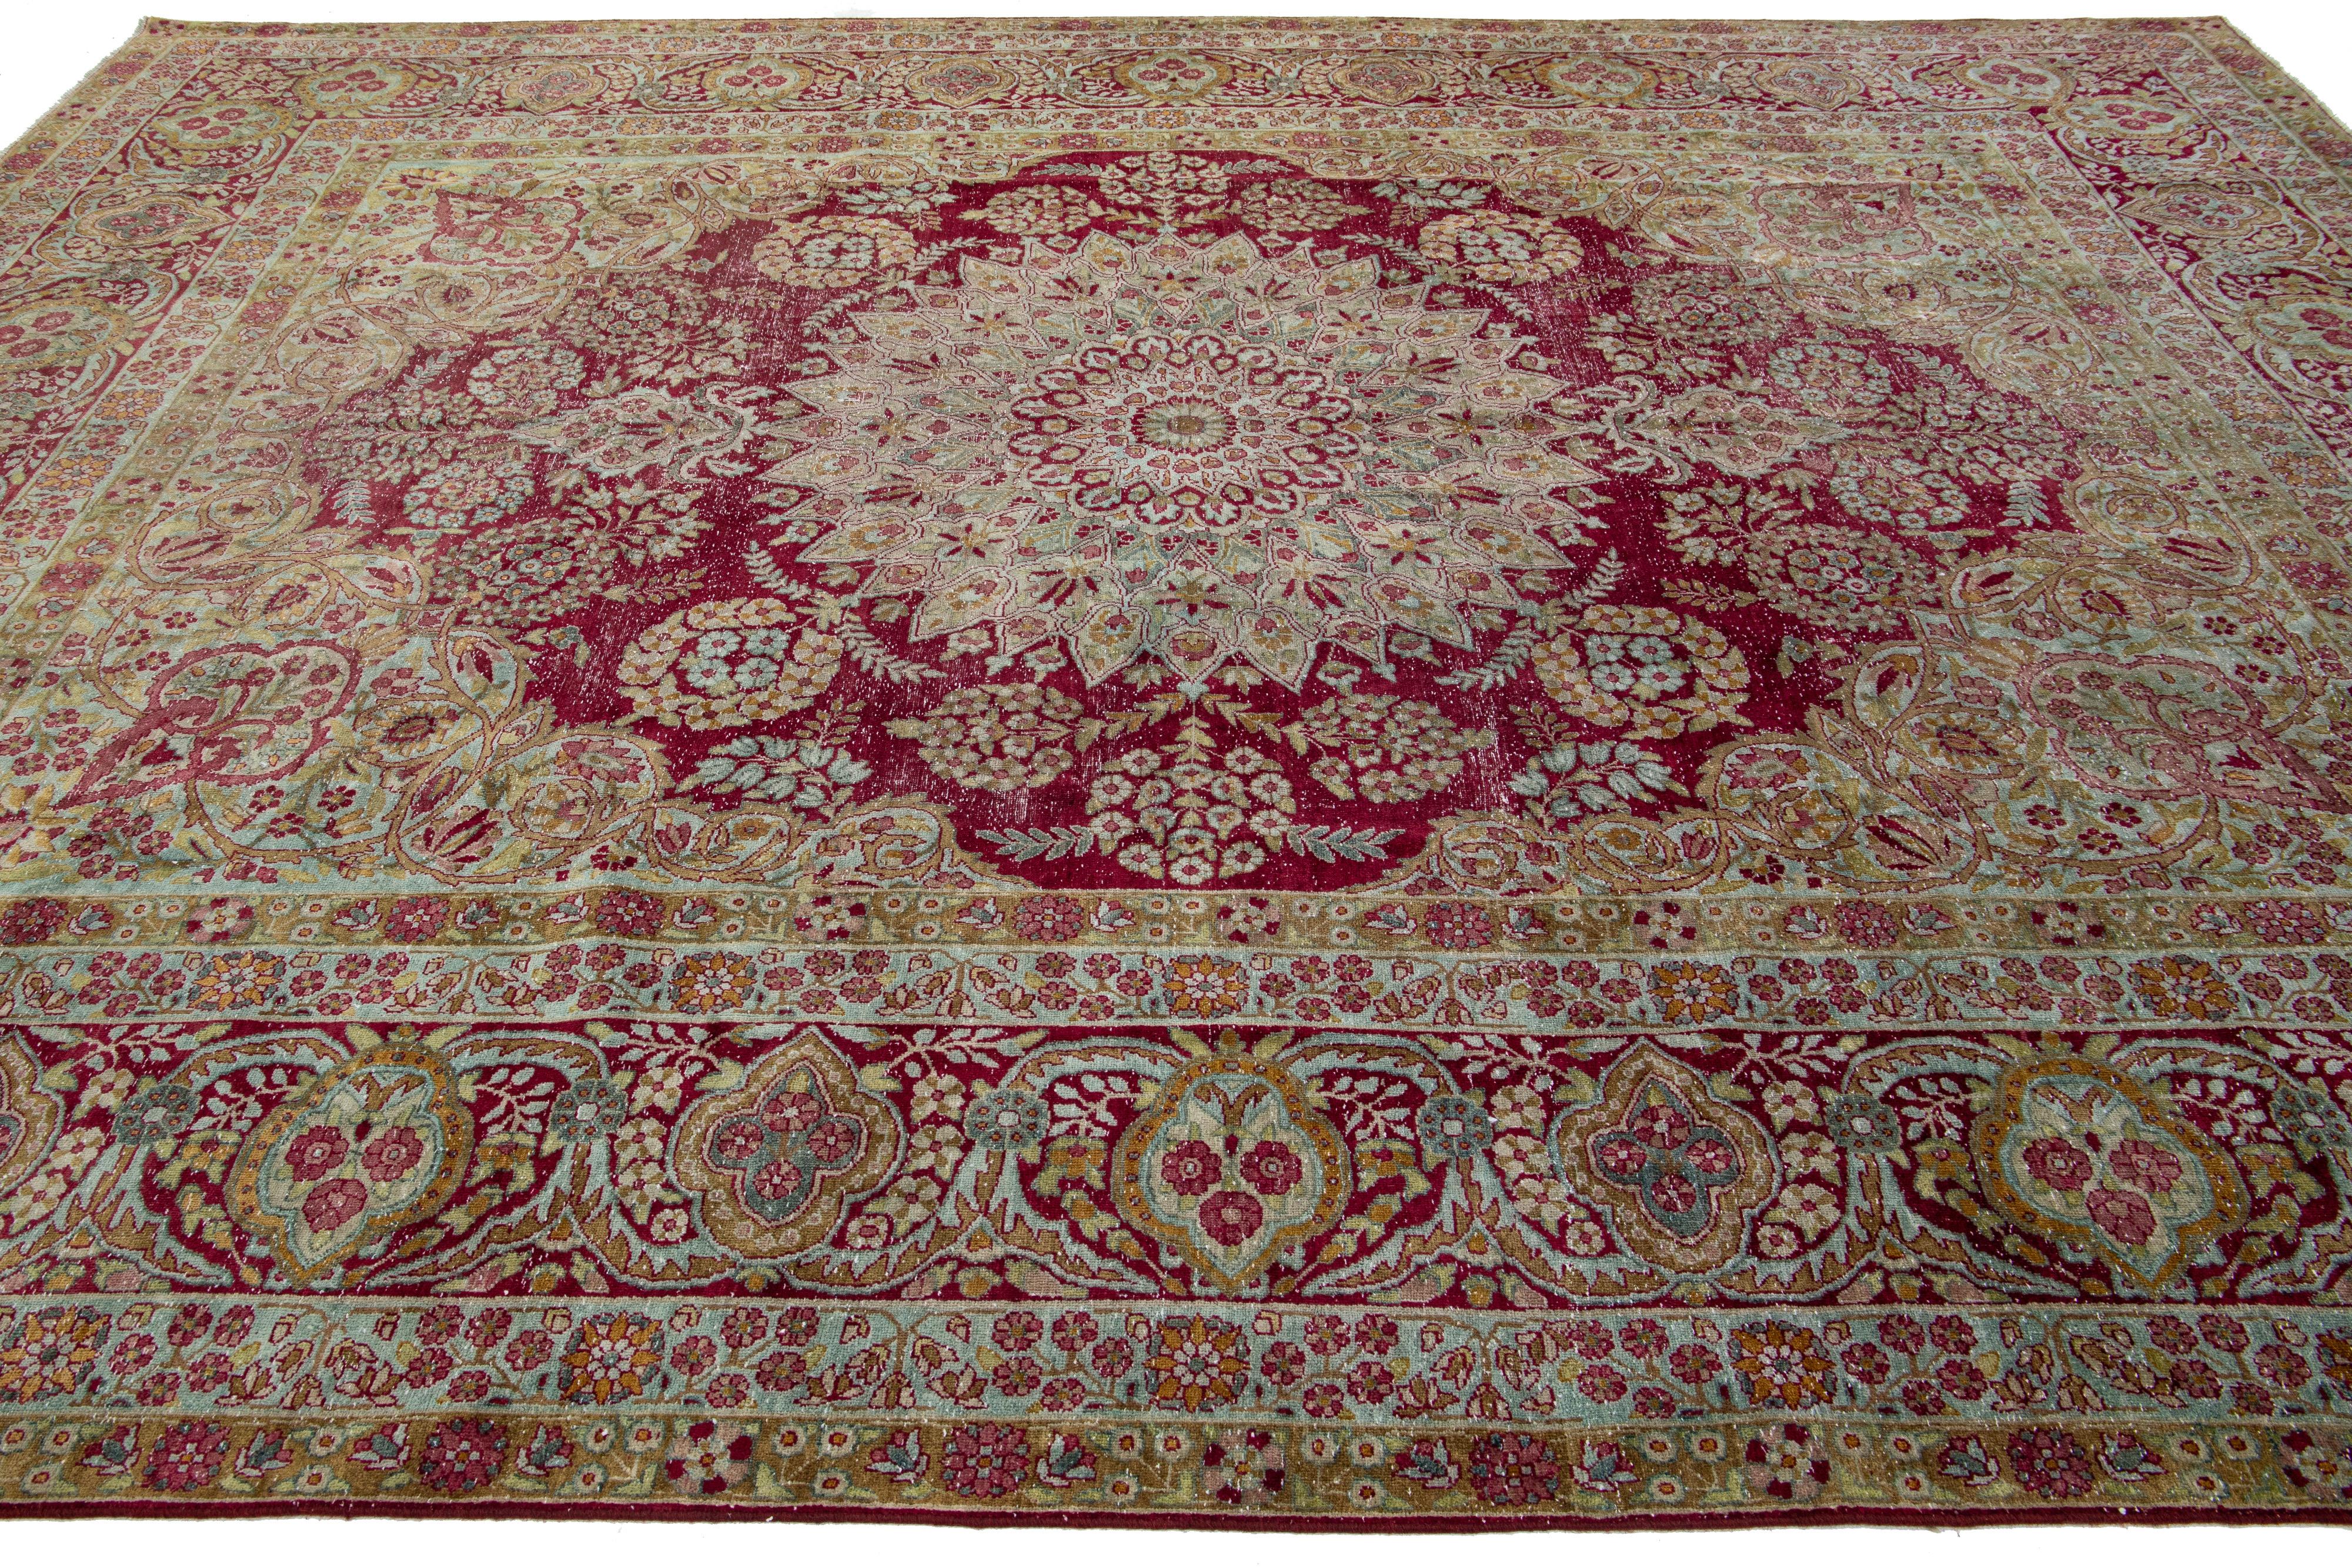 Antique Wool Rug Persian Kerman featuring a Medallion Floral Motif  For Sale 2